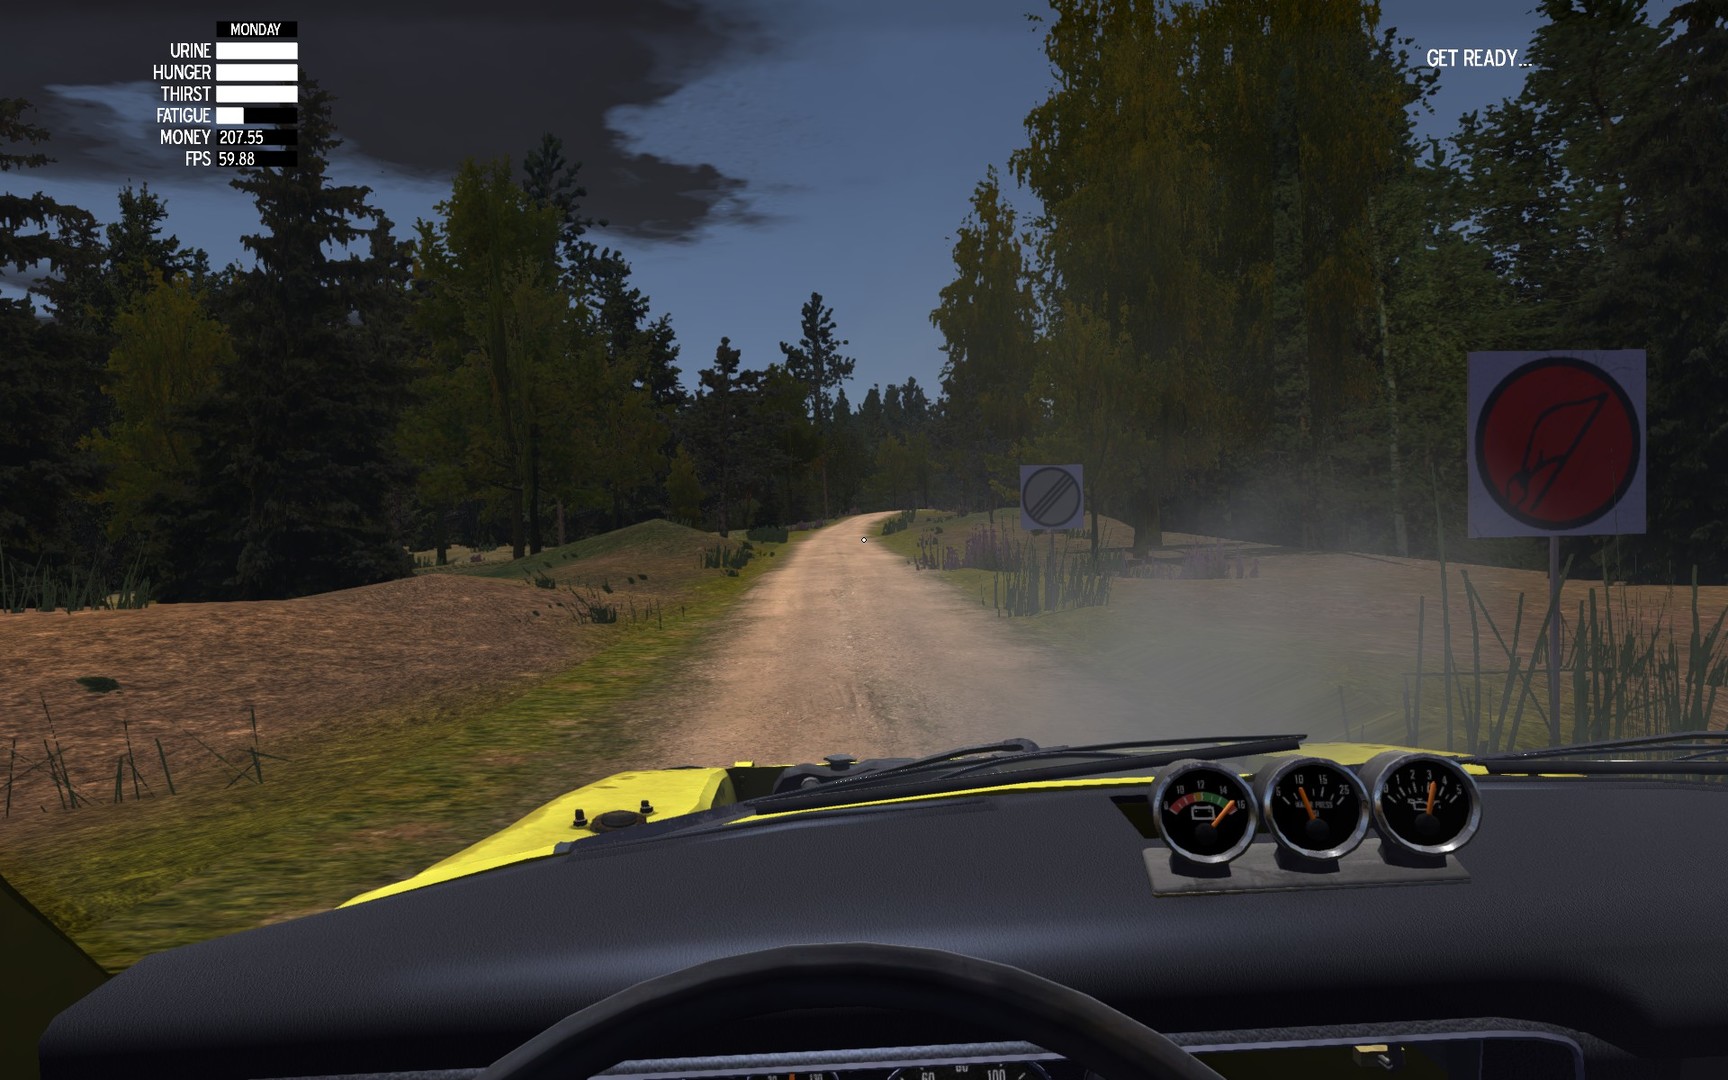 My Summer Car Images 